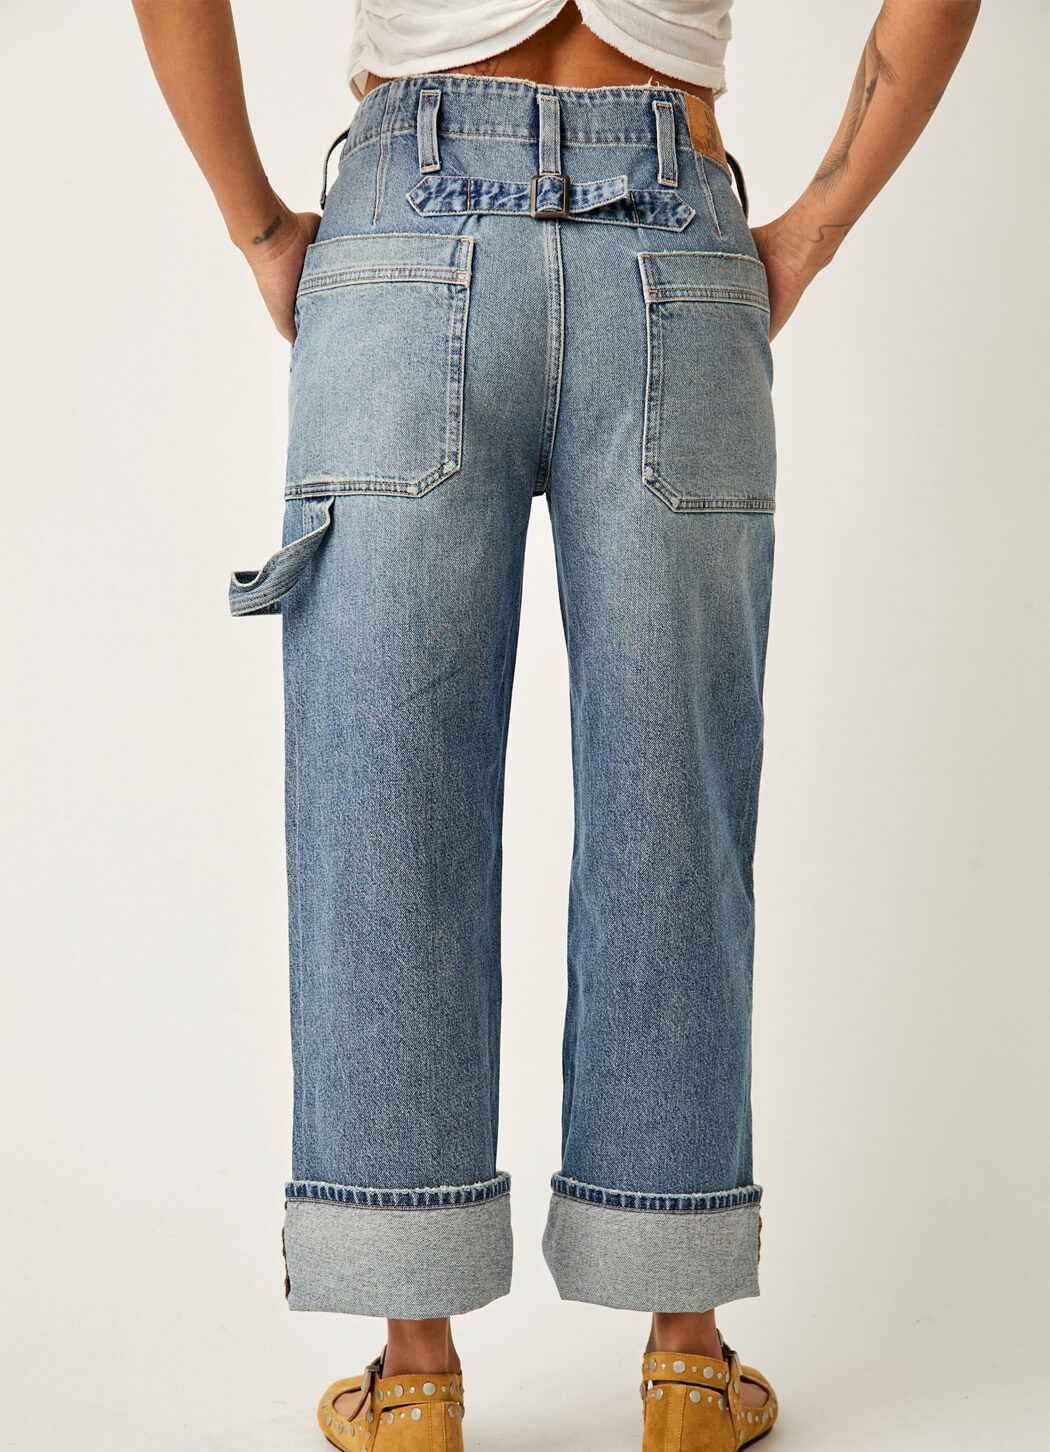 Free People Major Leagues Mid Rise Cuffed Jeans – Details Direct